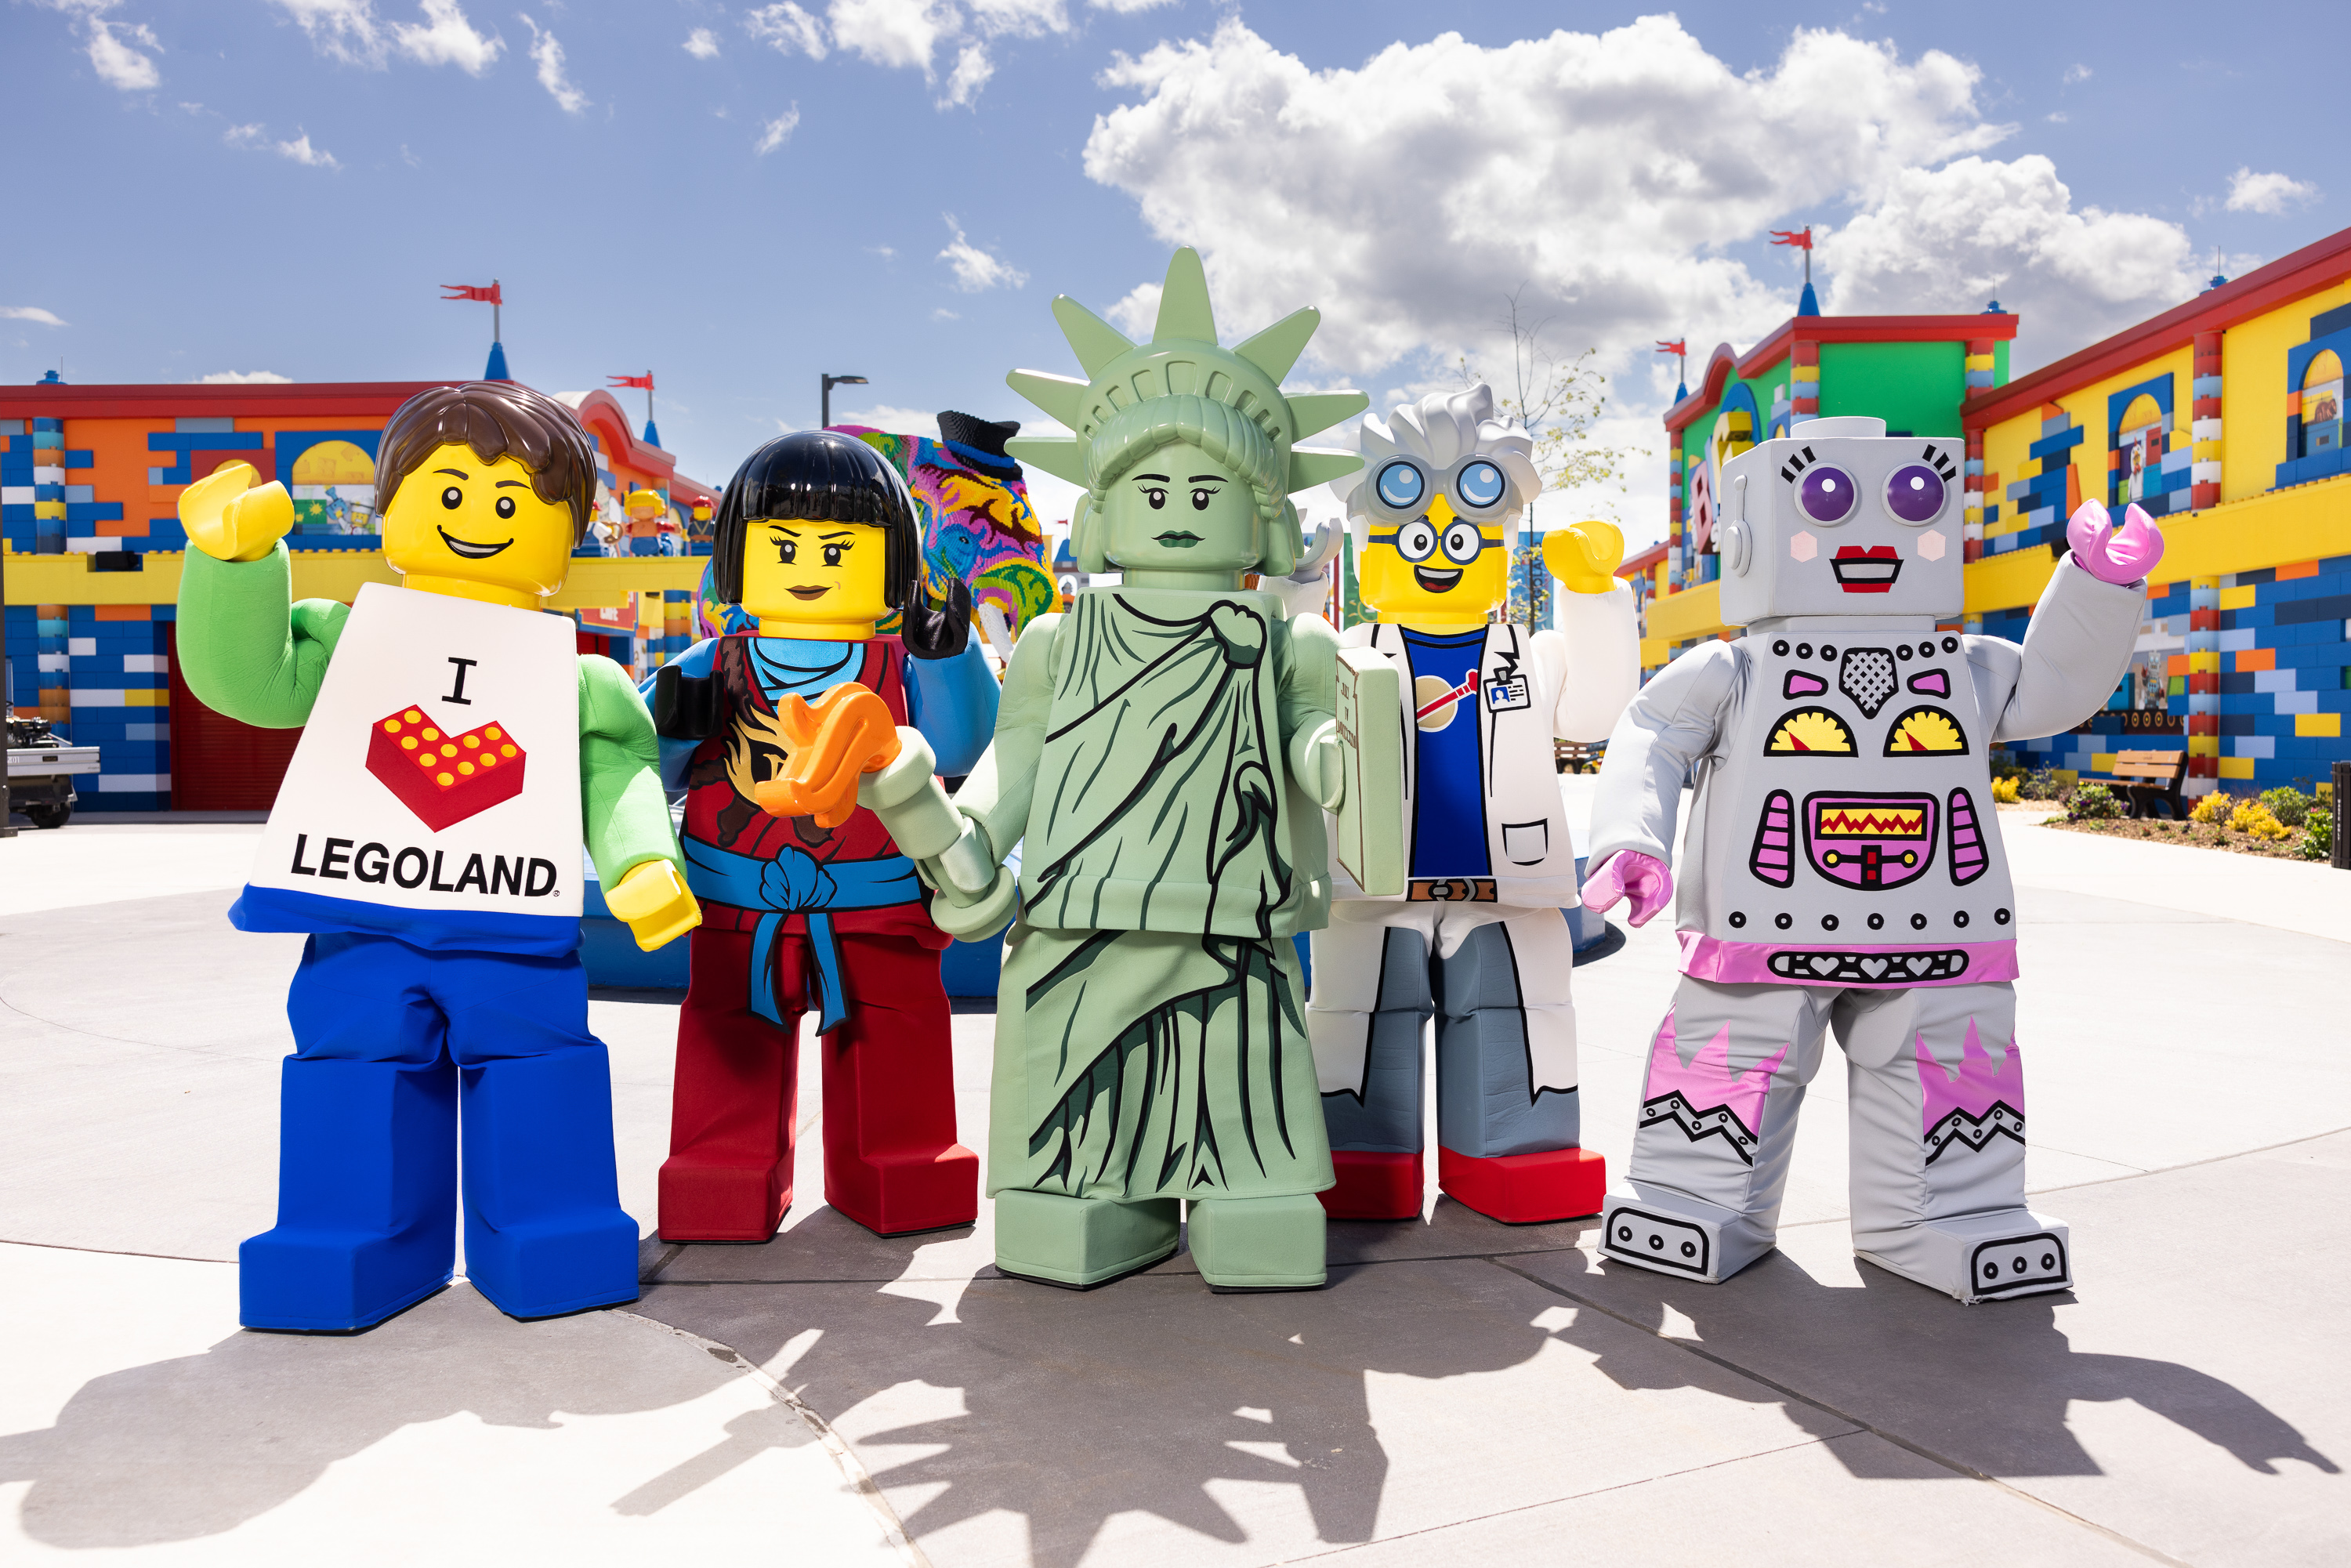 LEGO Characters pose in Brick Street